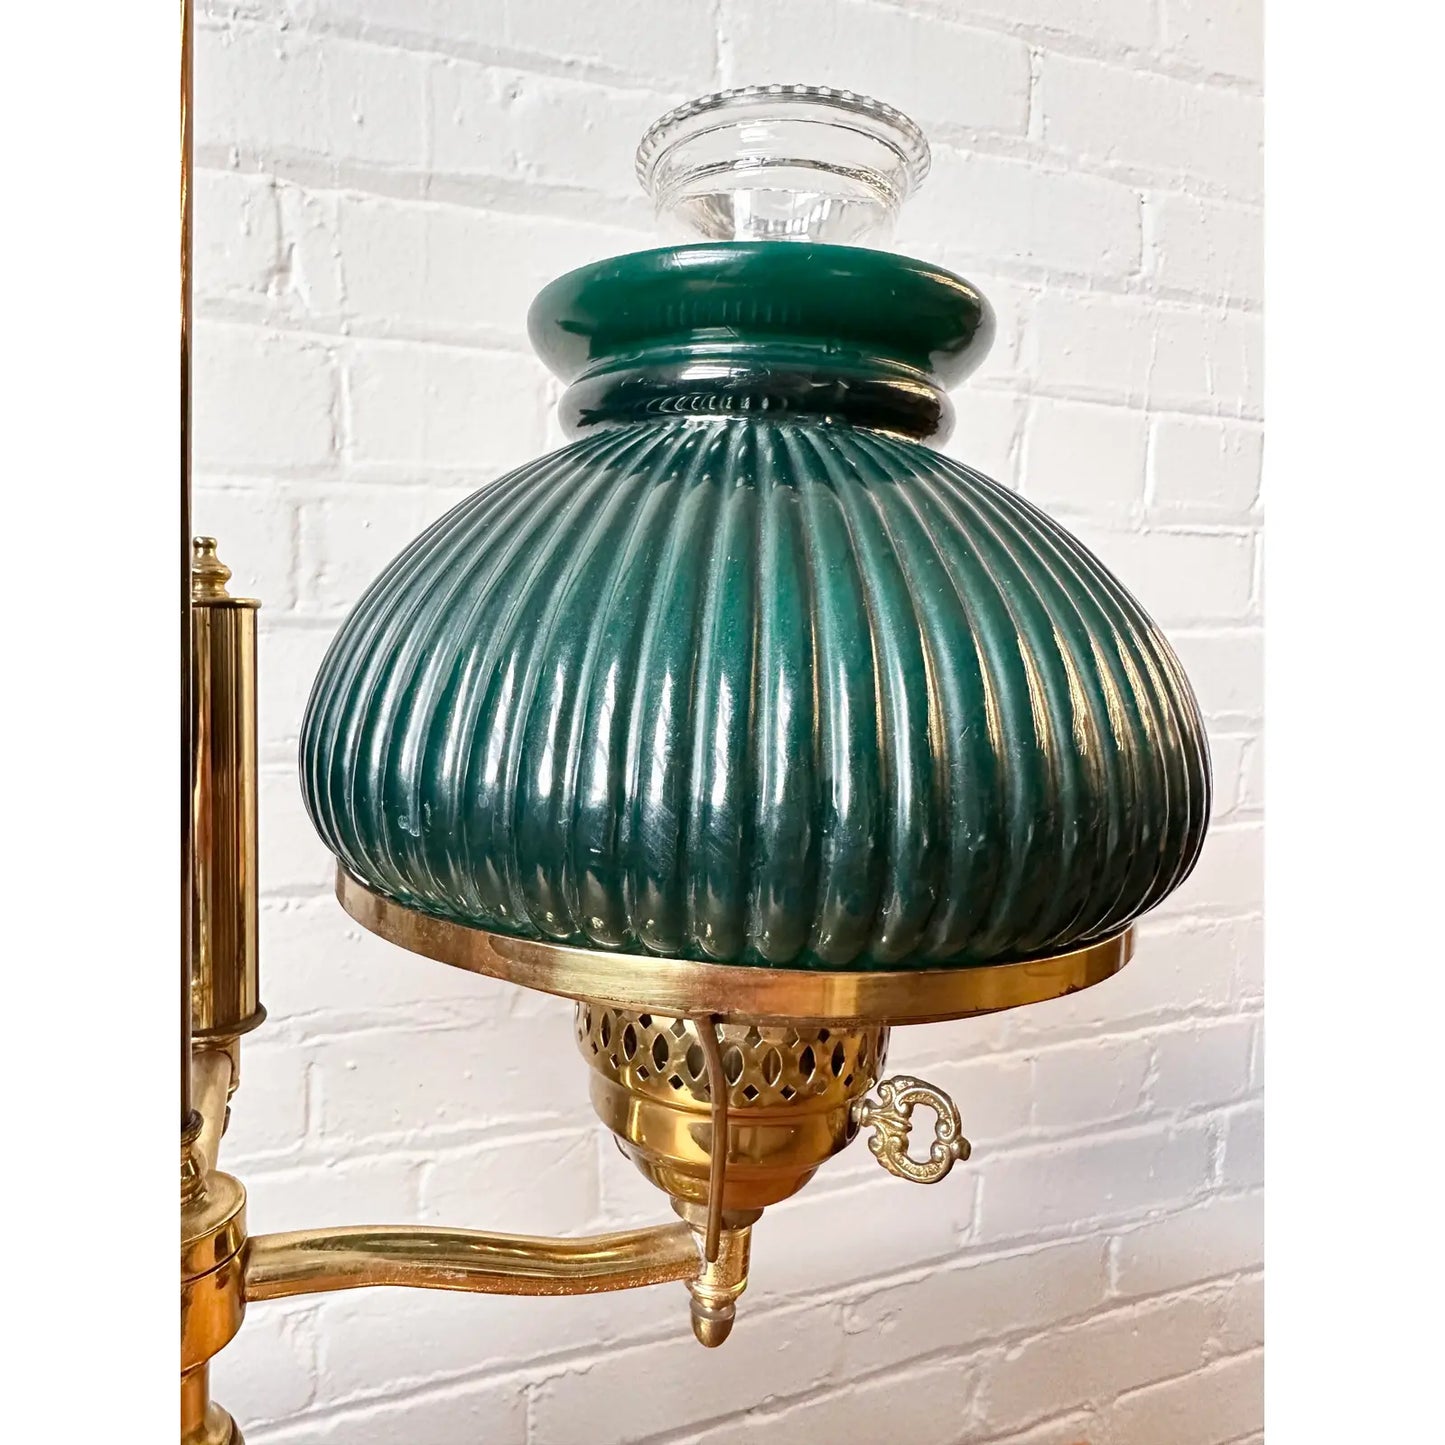 ANTIQUE DESK LAMP WITH DUAL GREEN GLASS SHADES